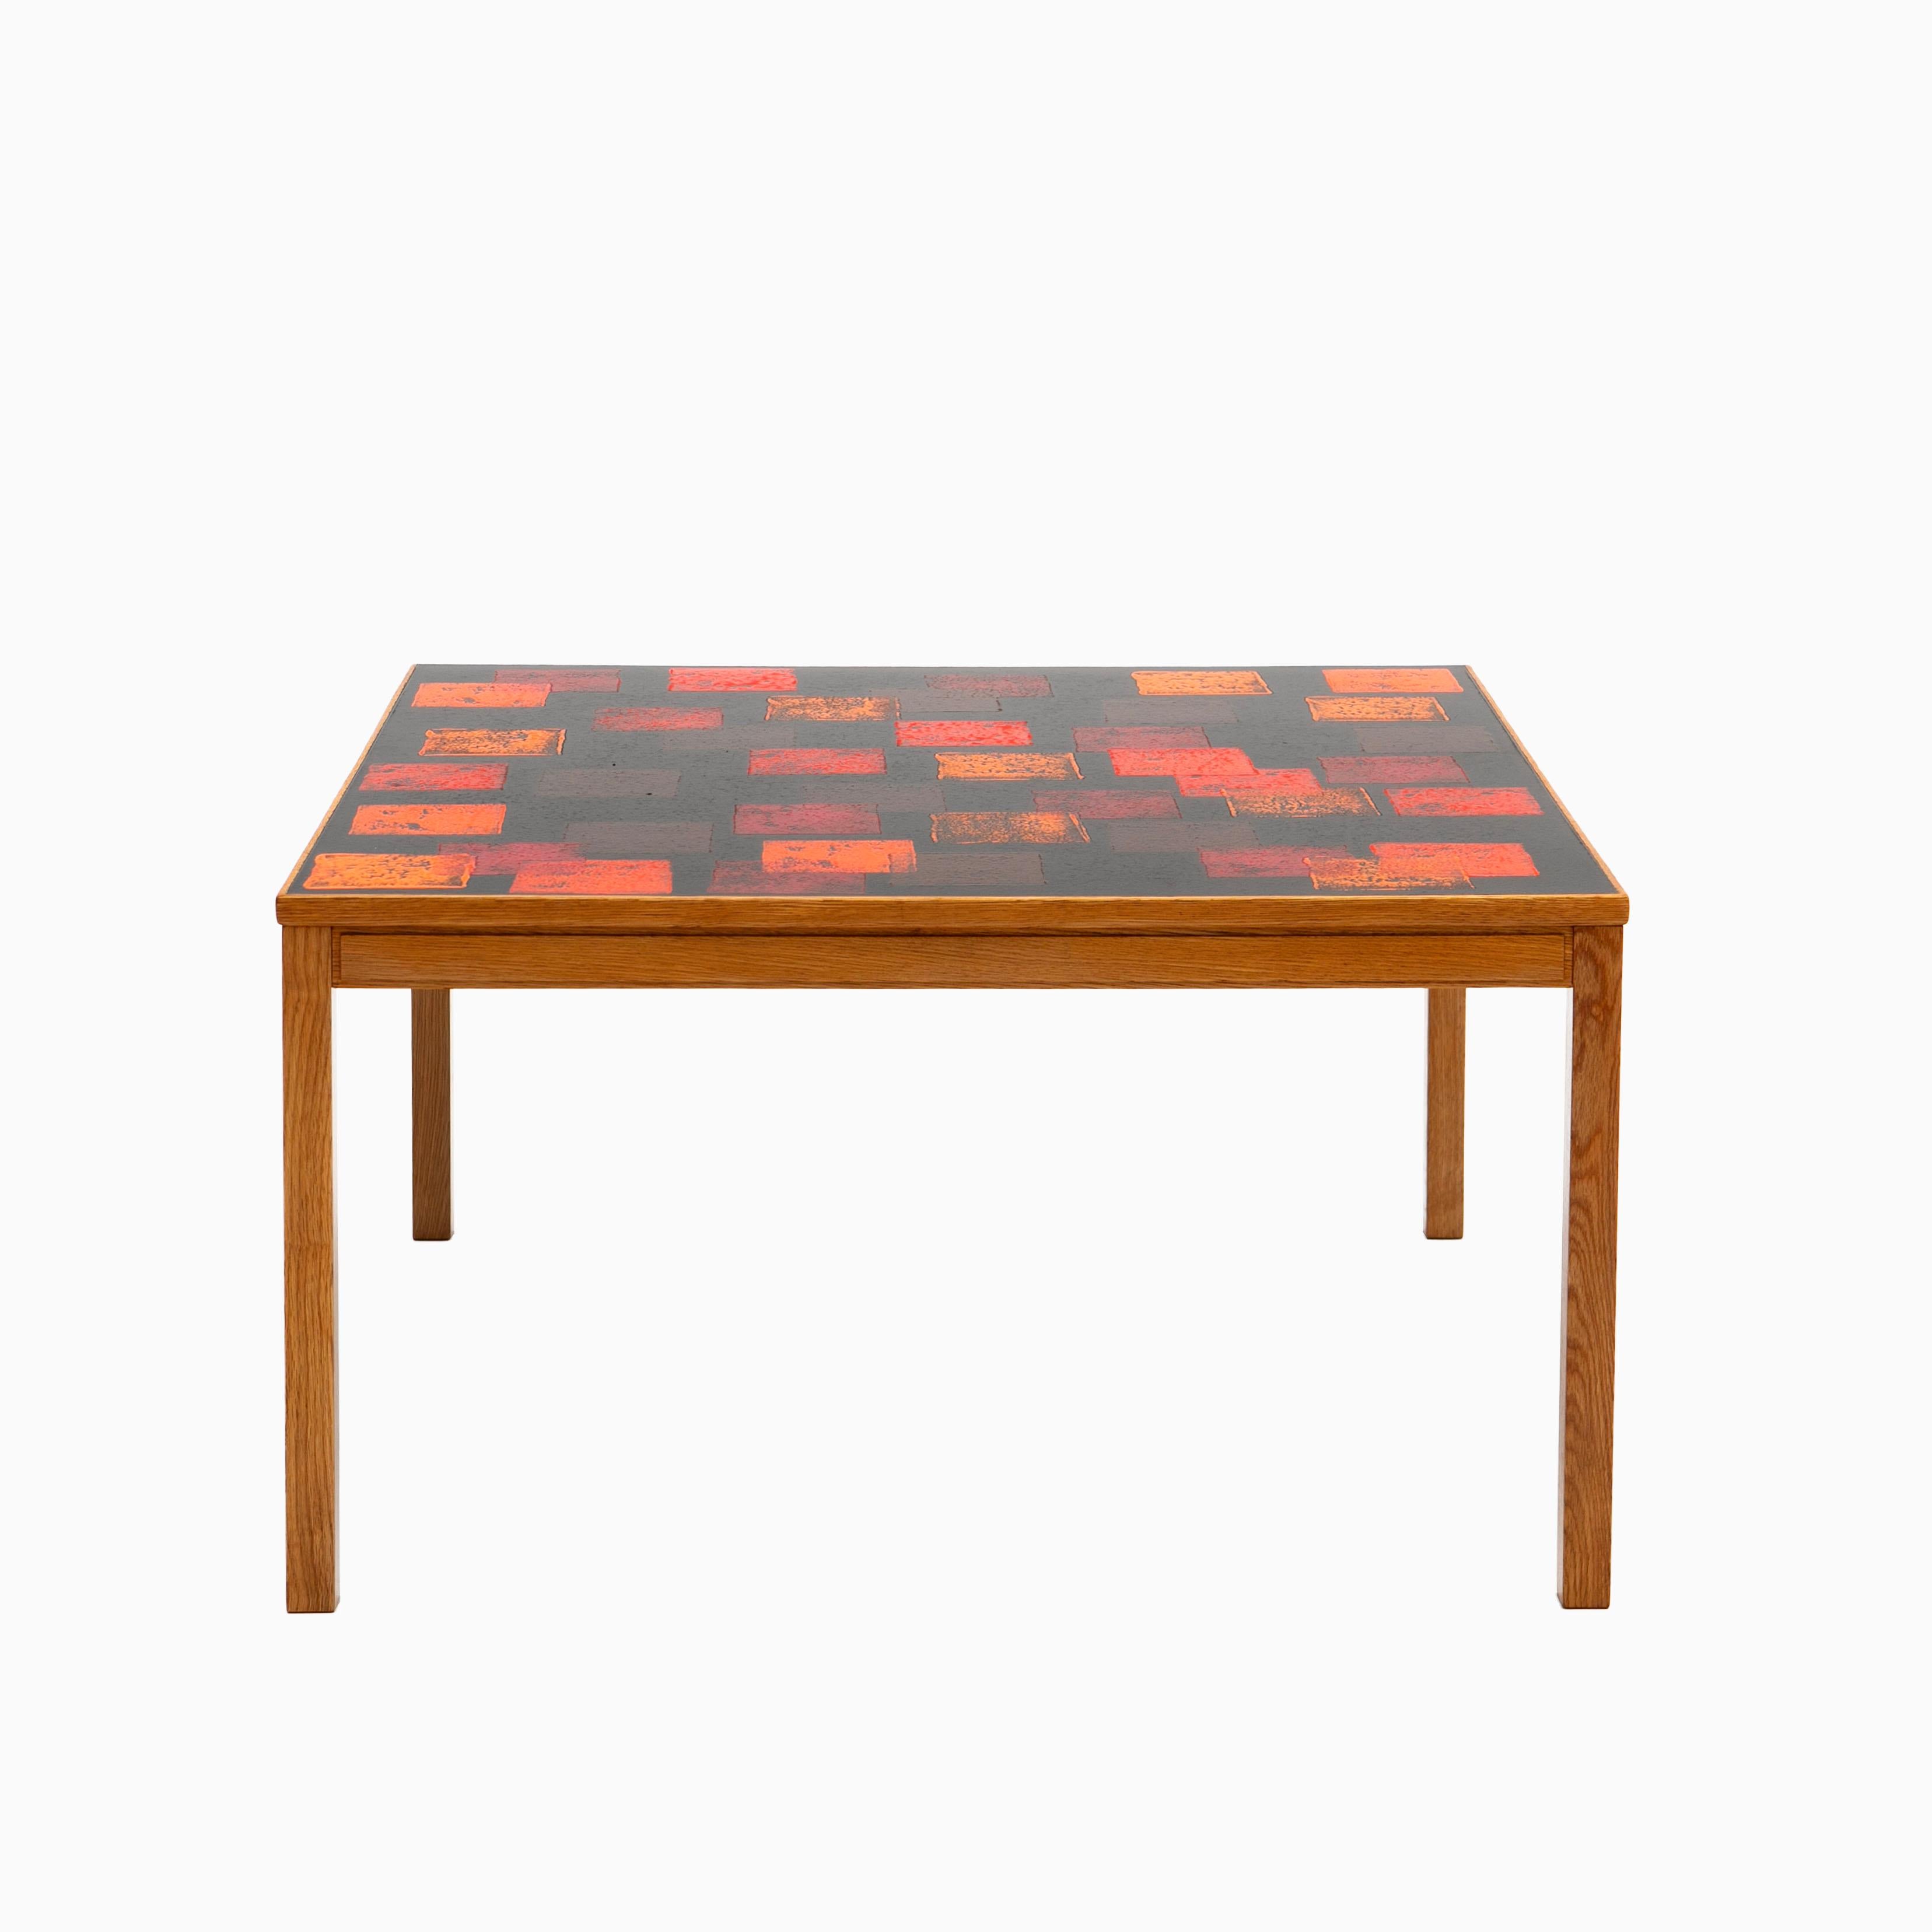 Algot P. Törneman 1909-1993
Enamel on copper and oak coffee table by for Nordiska Kompaniet.

This table was produced in a limited edition of 24 tables and this one is numbered 11.